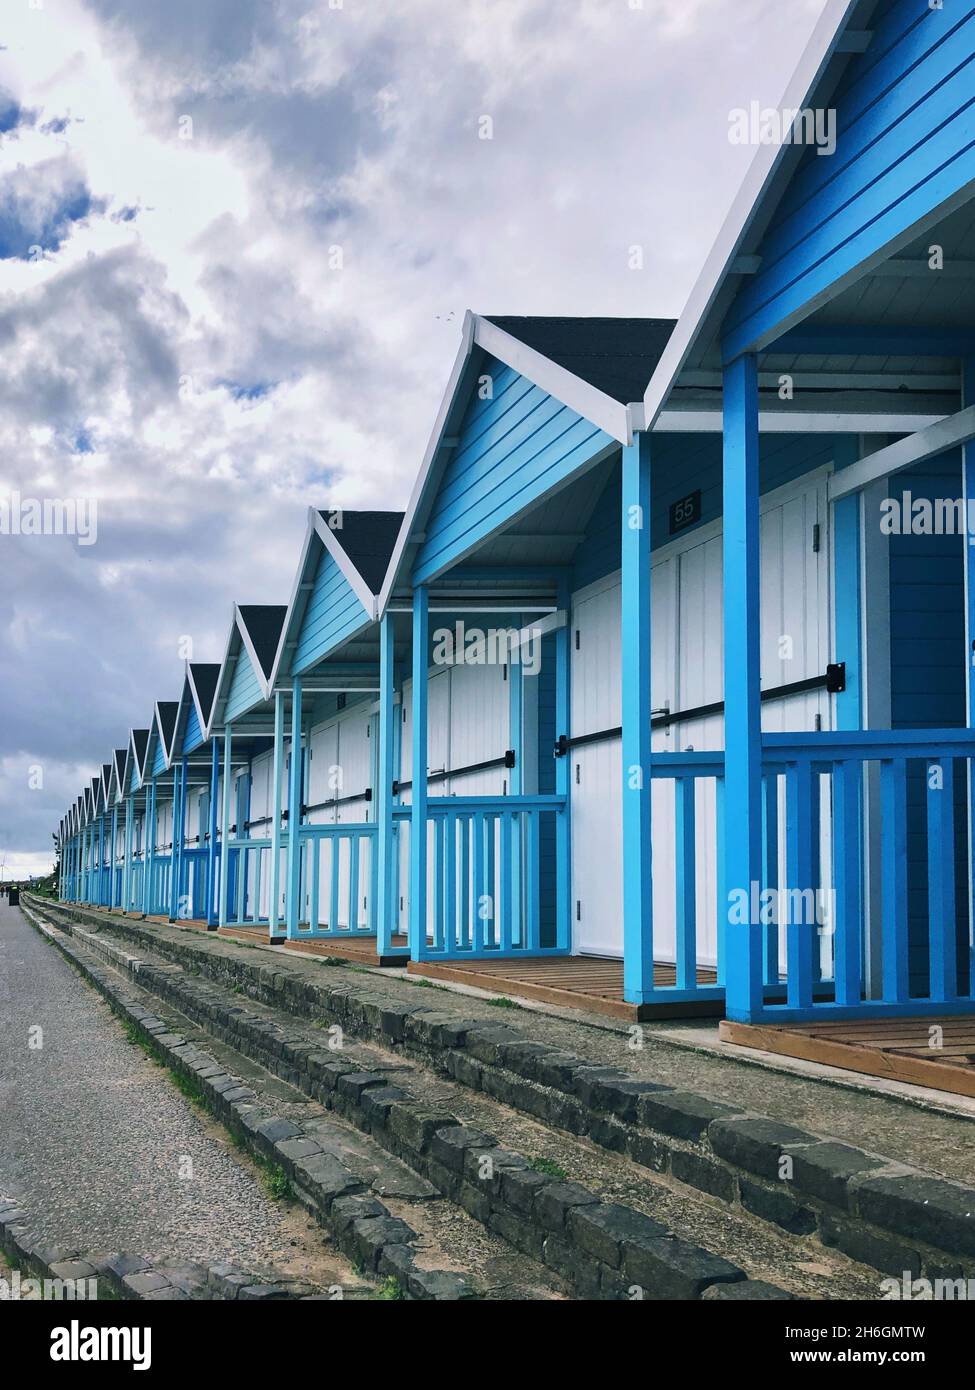 A row of beautiful blue beach huts at the traditional British seaside town of Bridlington Stock Photo